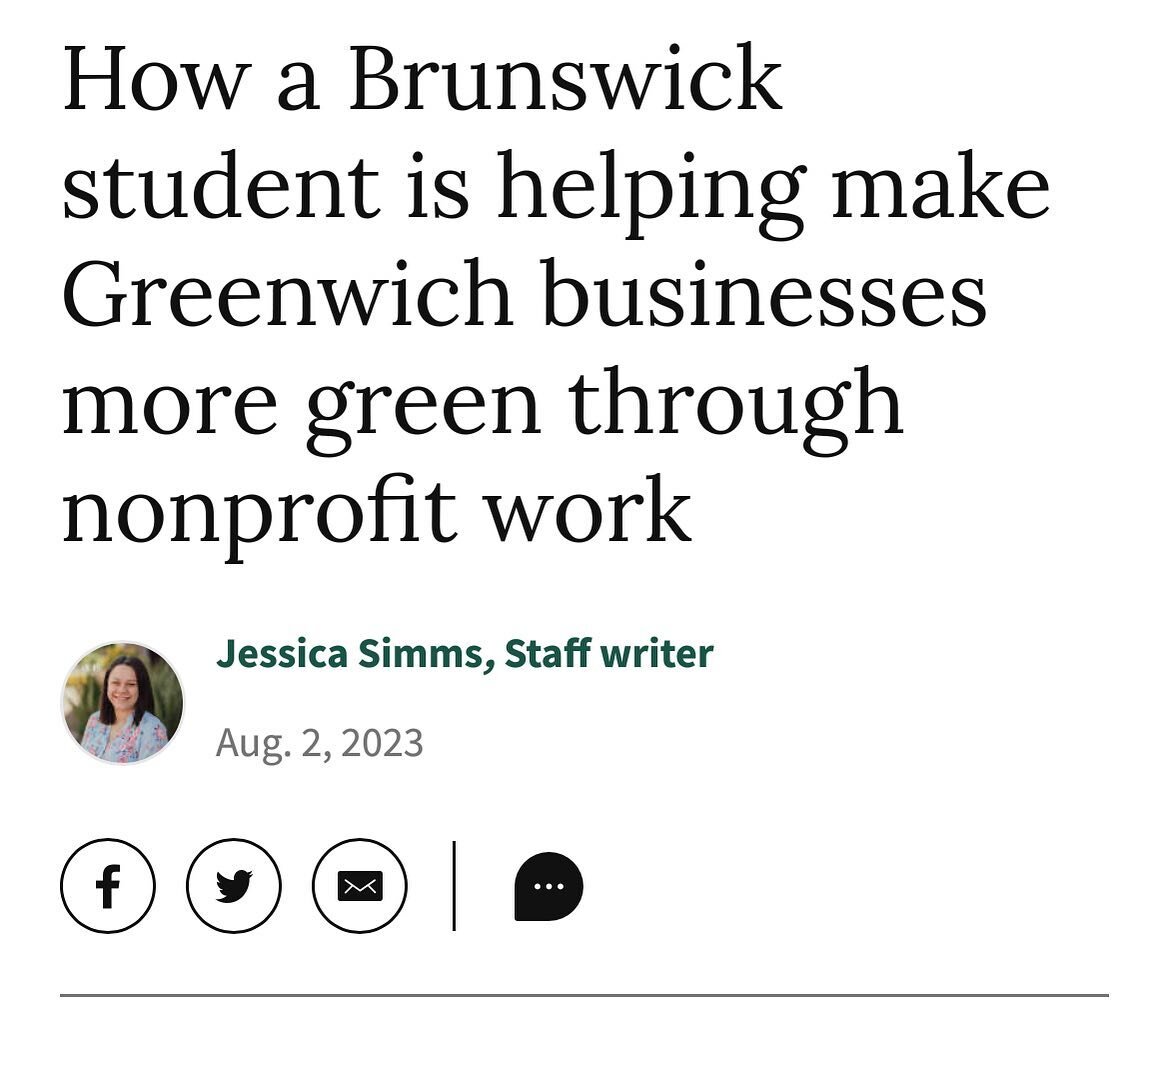 Check out @greenwichtimes article about the founding of Green Greenwich and a look into what we have been up to. To read the full article click this link https://www.greenwichtime.com/news/education/article/greenwich-brunswick-green-sustainable-asher